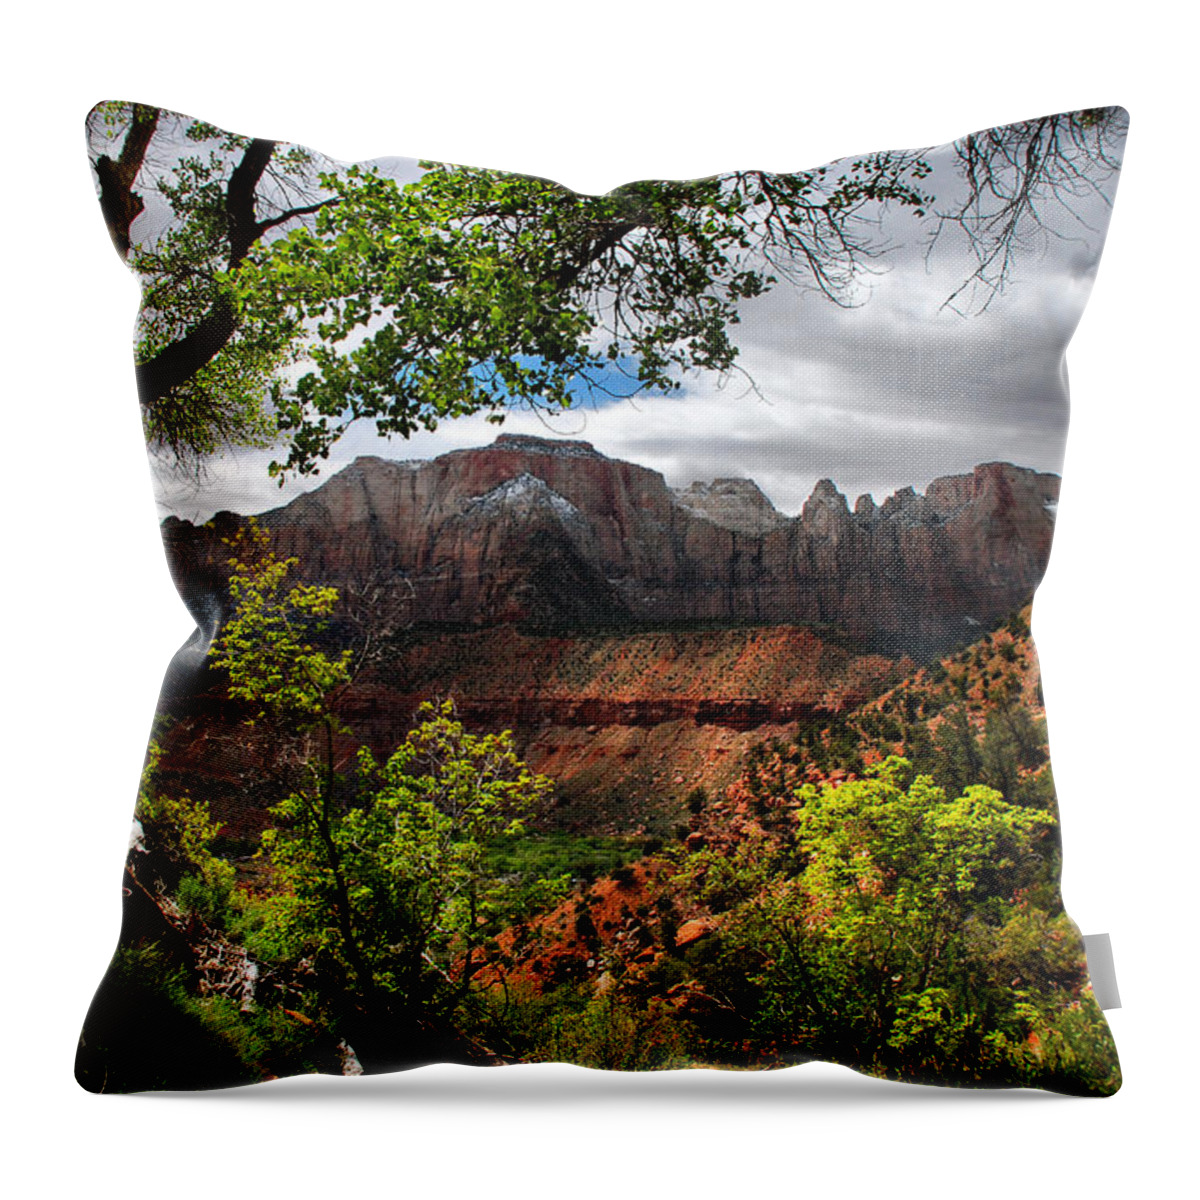 Landscape Throw Pillow featuring the photograph Luscious View by Barbara Manis